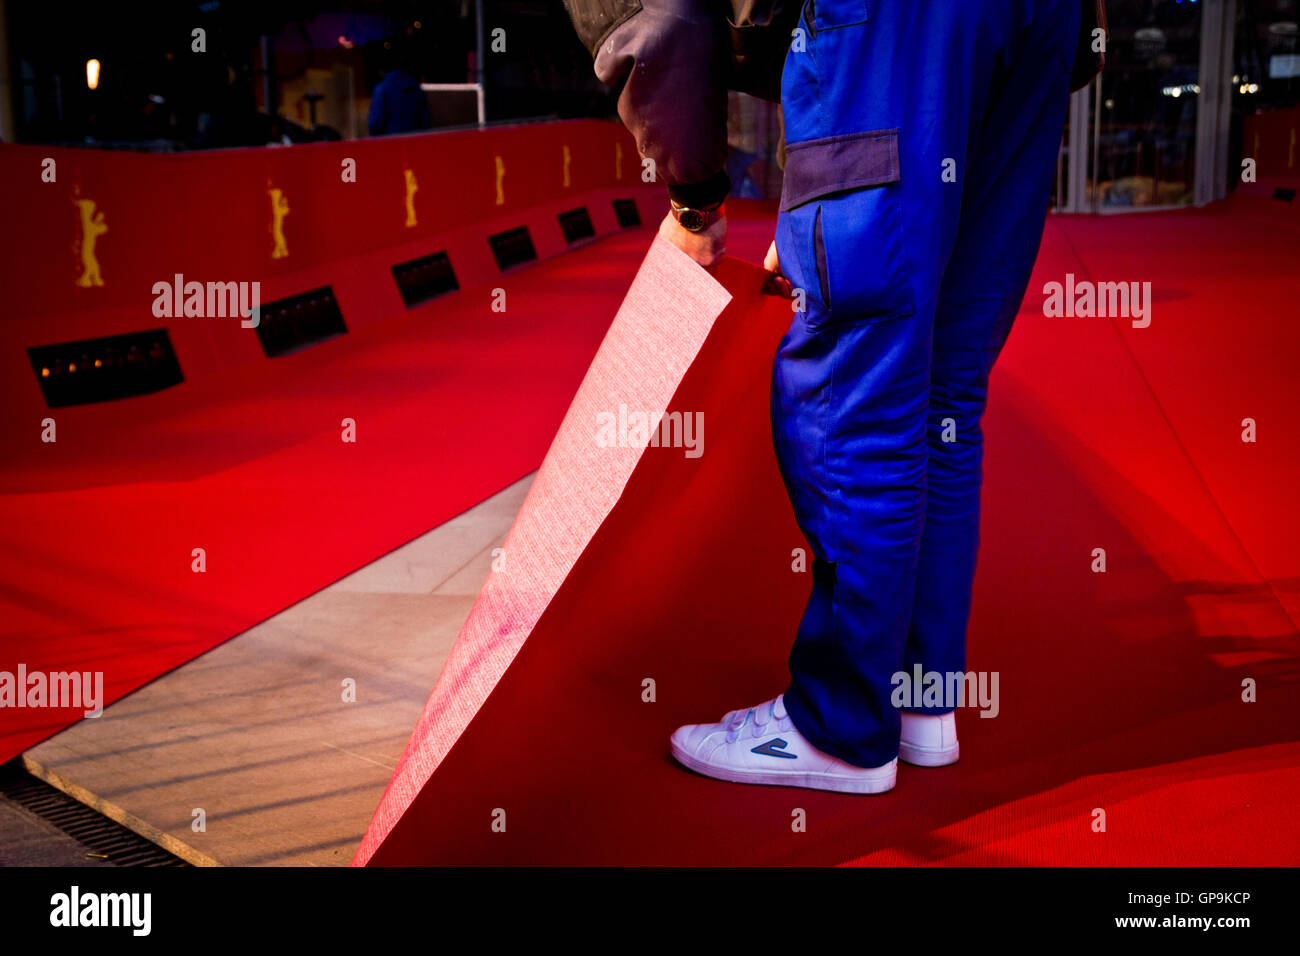 Workers unrolling the red carpet outside the Potsdamer Platz Theatre in Berlin, Germany. Stock Photo